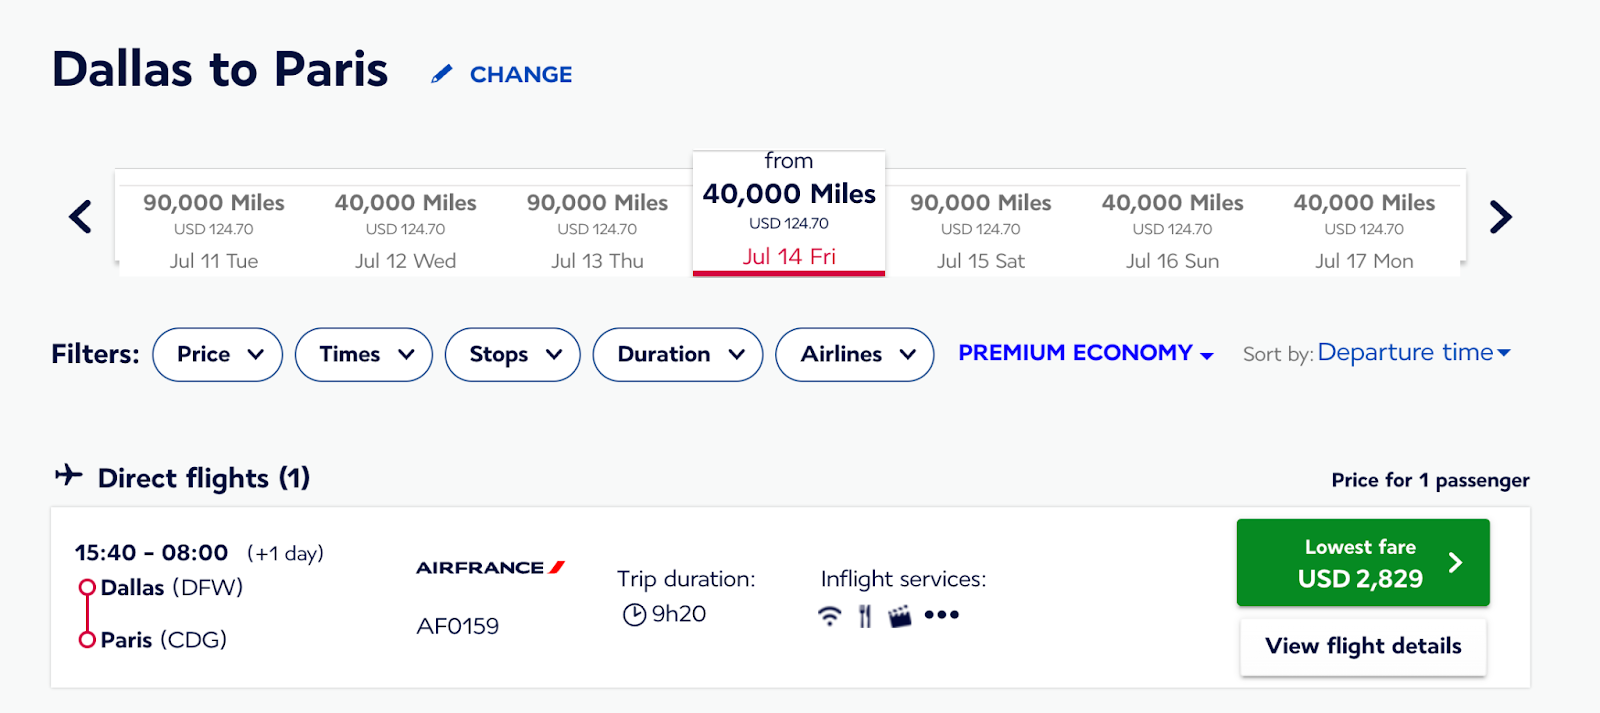 This image shows the dollar cost of an Air France flight from DFW to CDG.